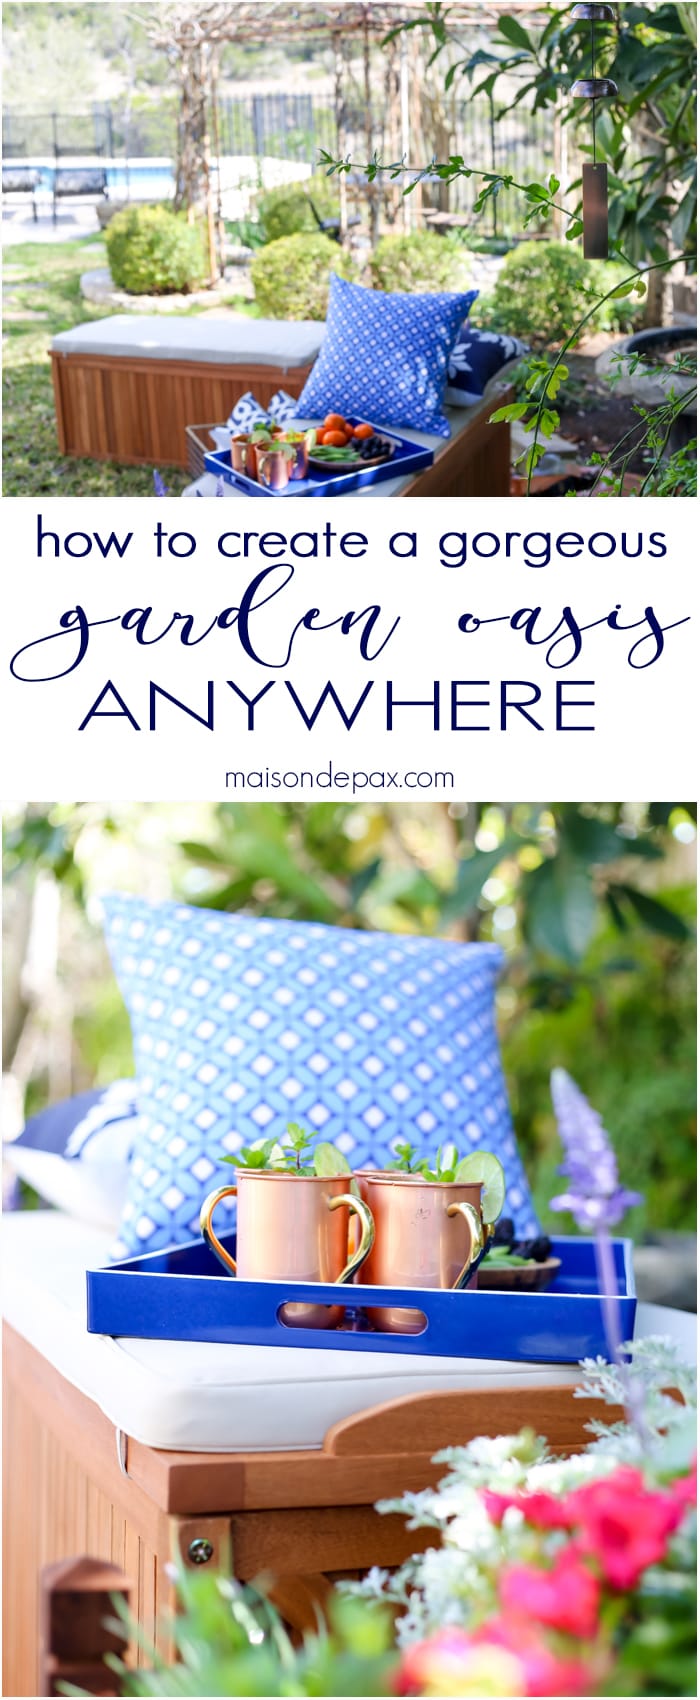 I love this idea! How to create a gorgeous garden oasis anywhere... the best tips for making a perfect outdoor sanctuary | maisondepax.com